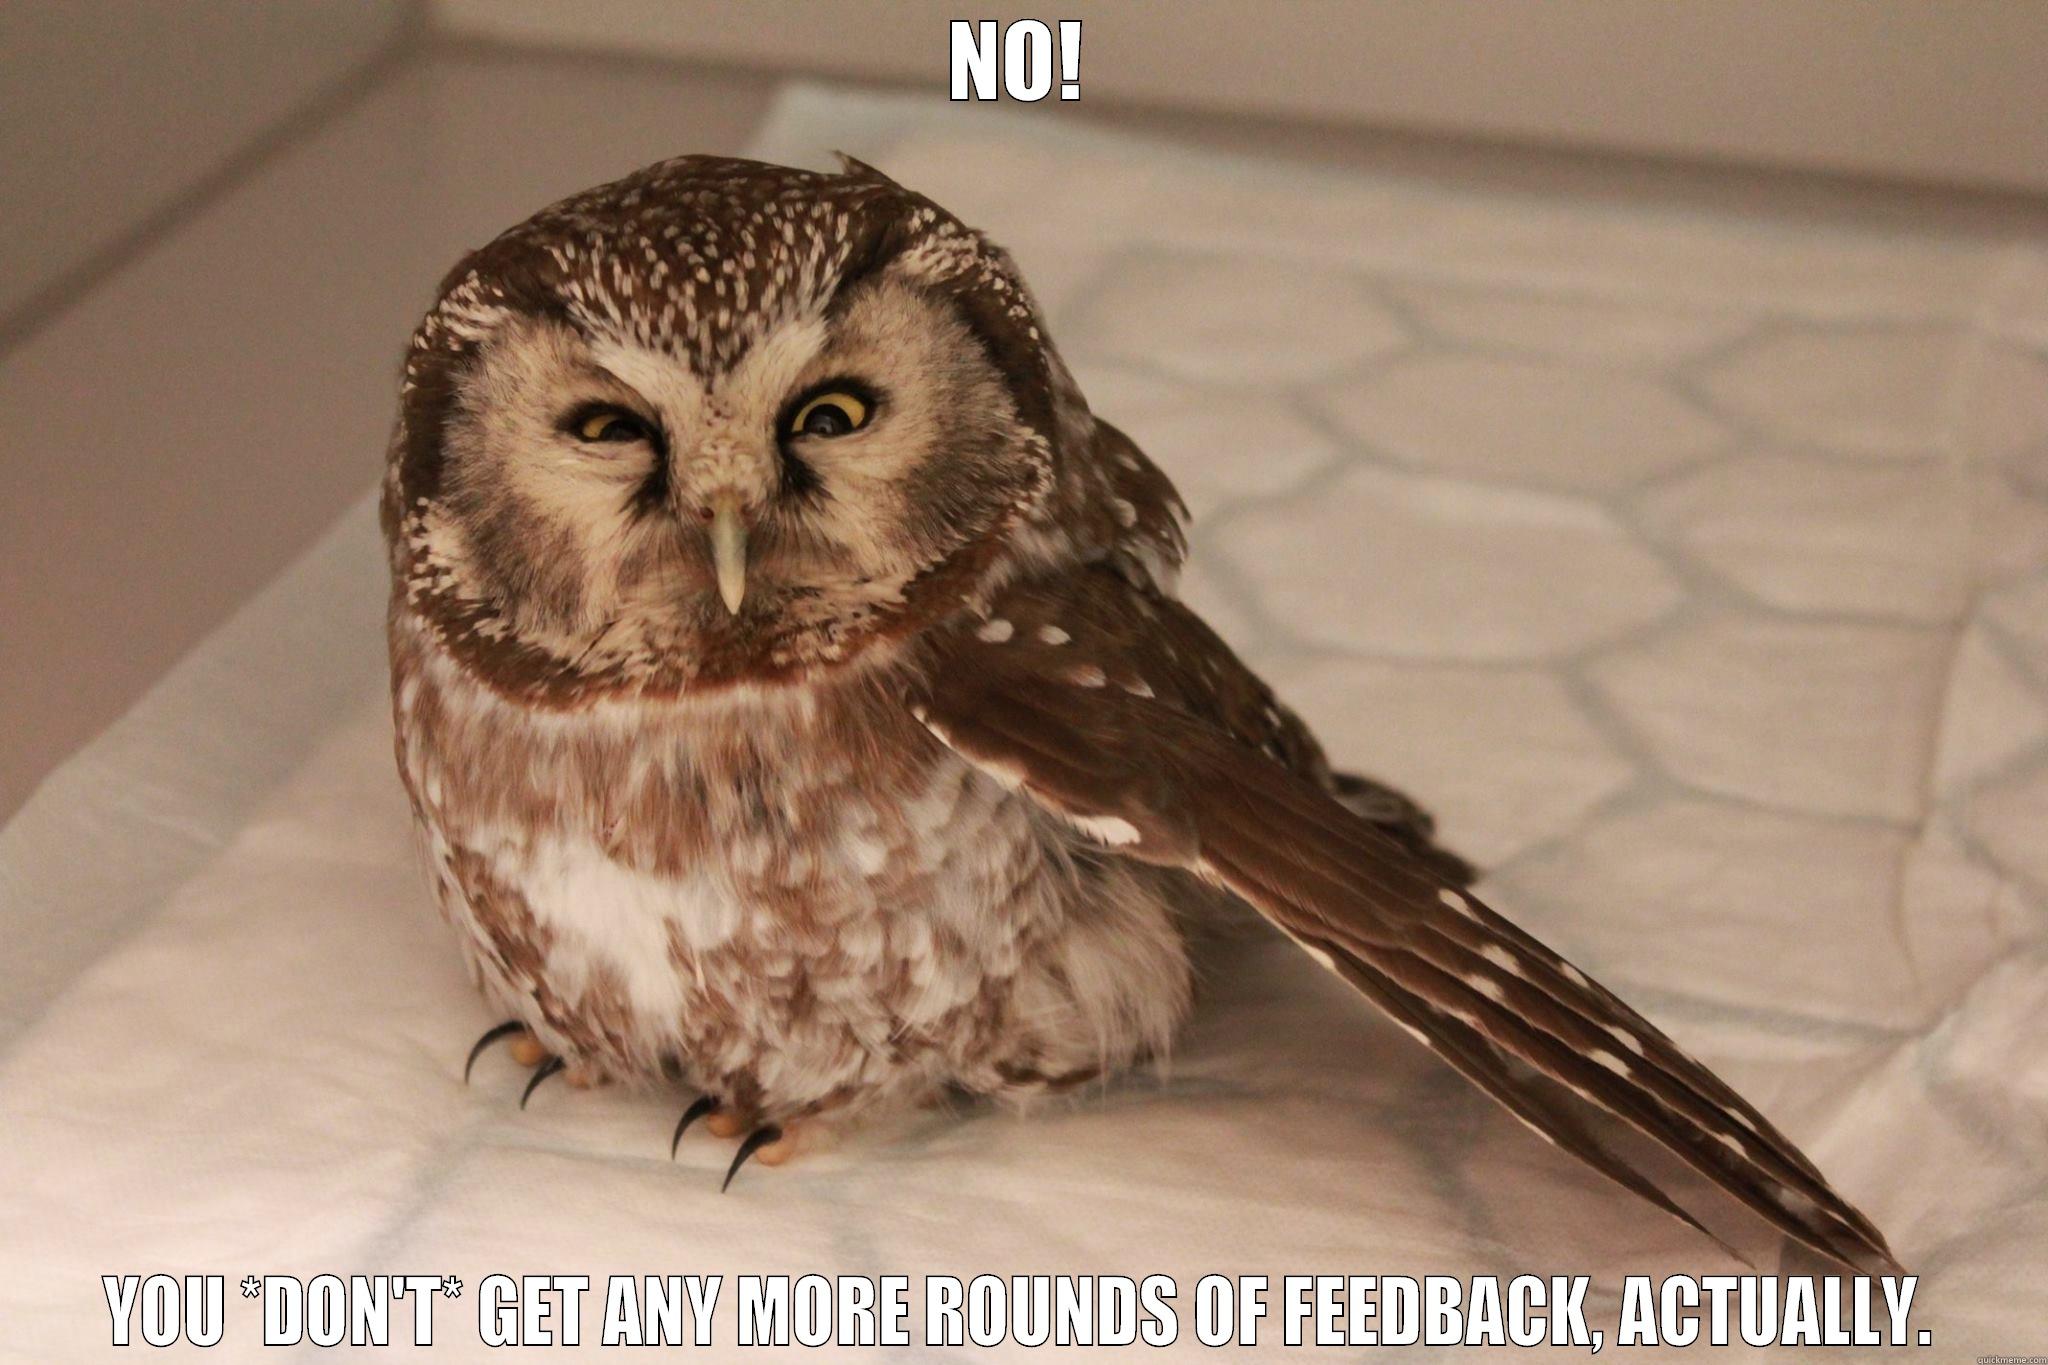 Killer Owl - NO! YOU *DON'T* GET ANY MORE ROUNDS OF FEEDBACK, ACTUALLY. Misc